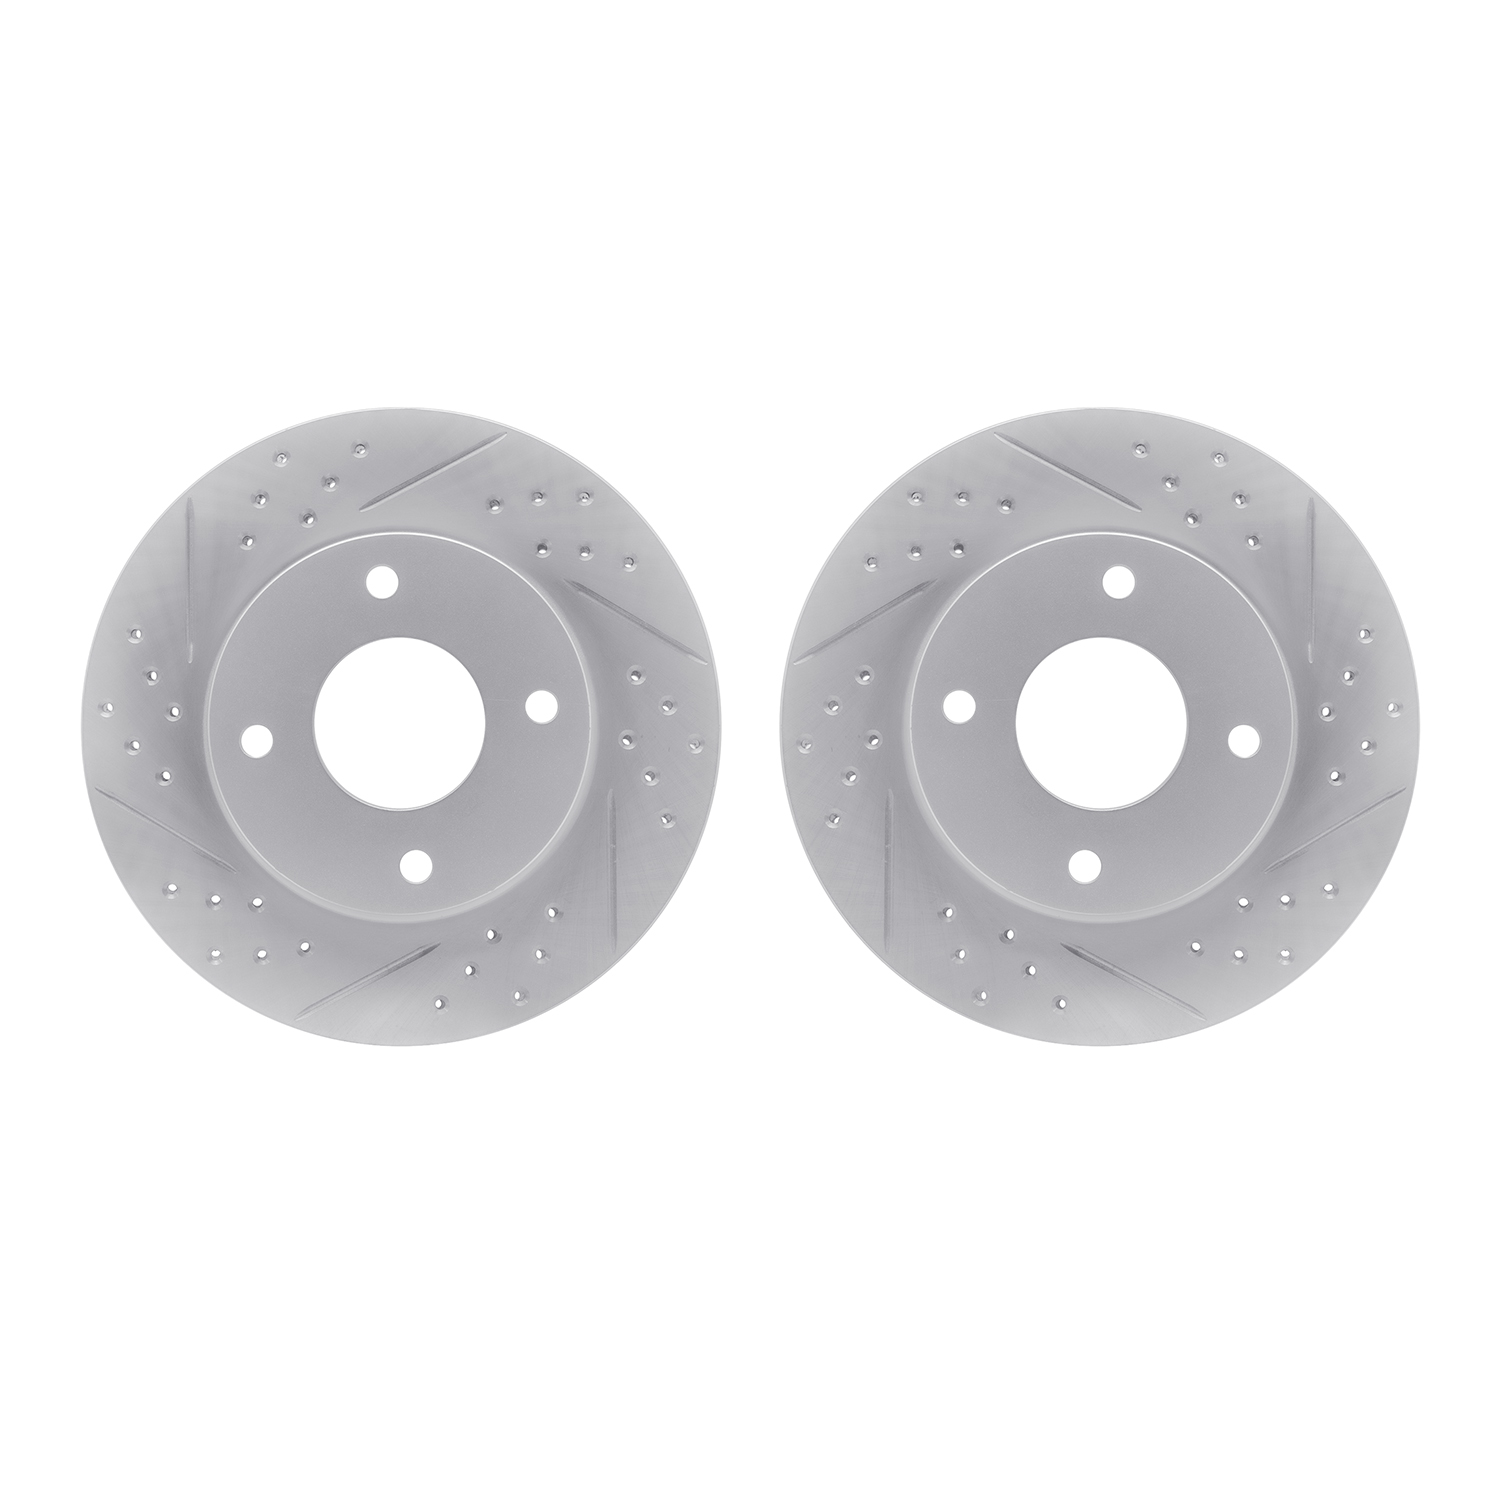 2002-67041 Geoperformance Drilled/Slotted Brake Rotors, 2007-2017 Infiniti/Nissan, Position: Front